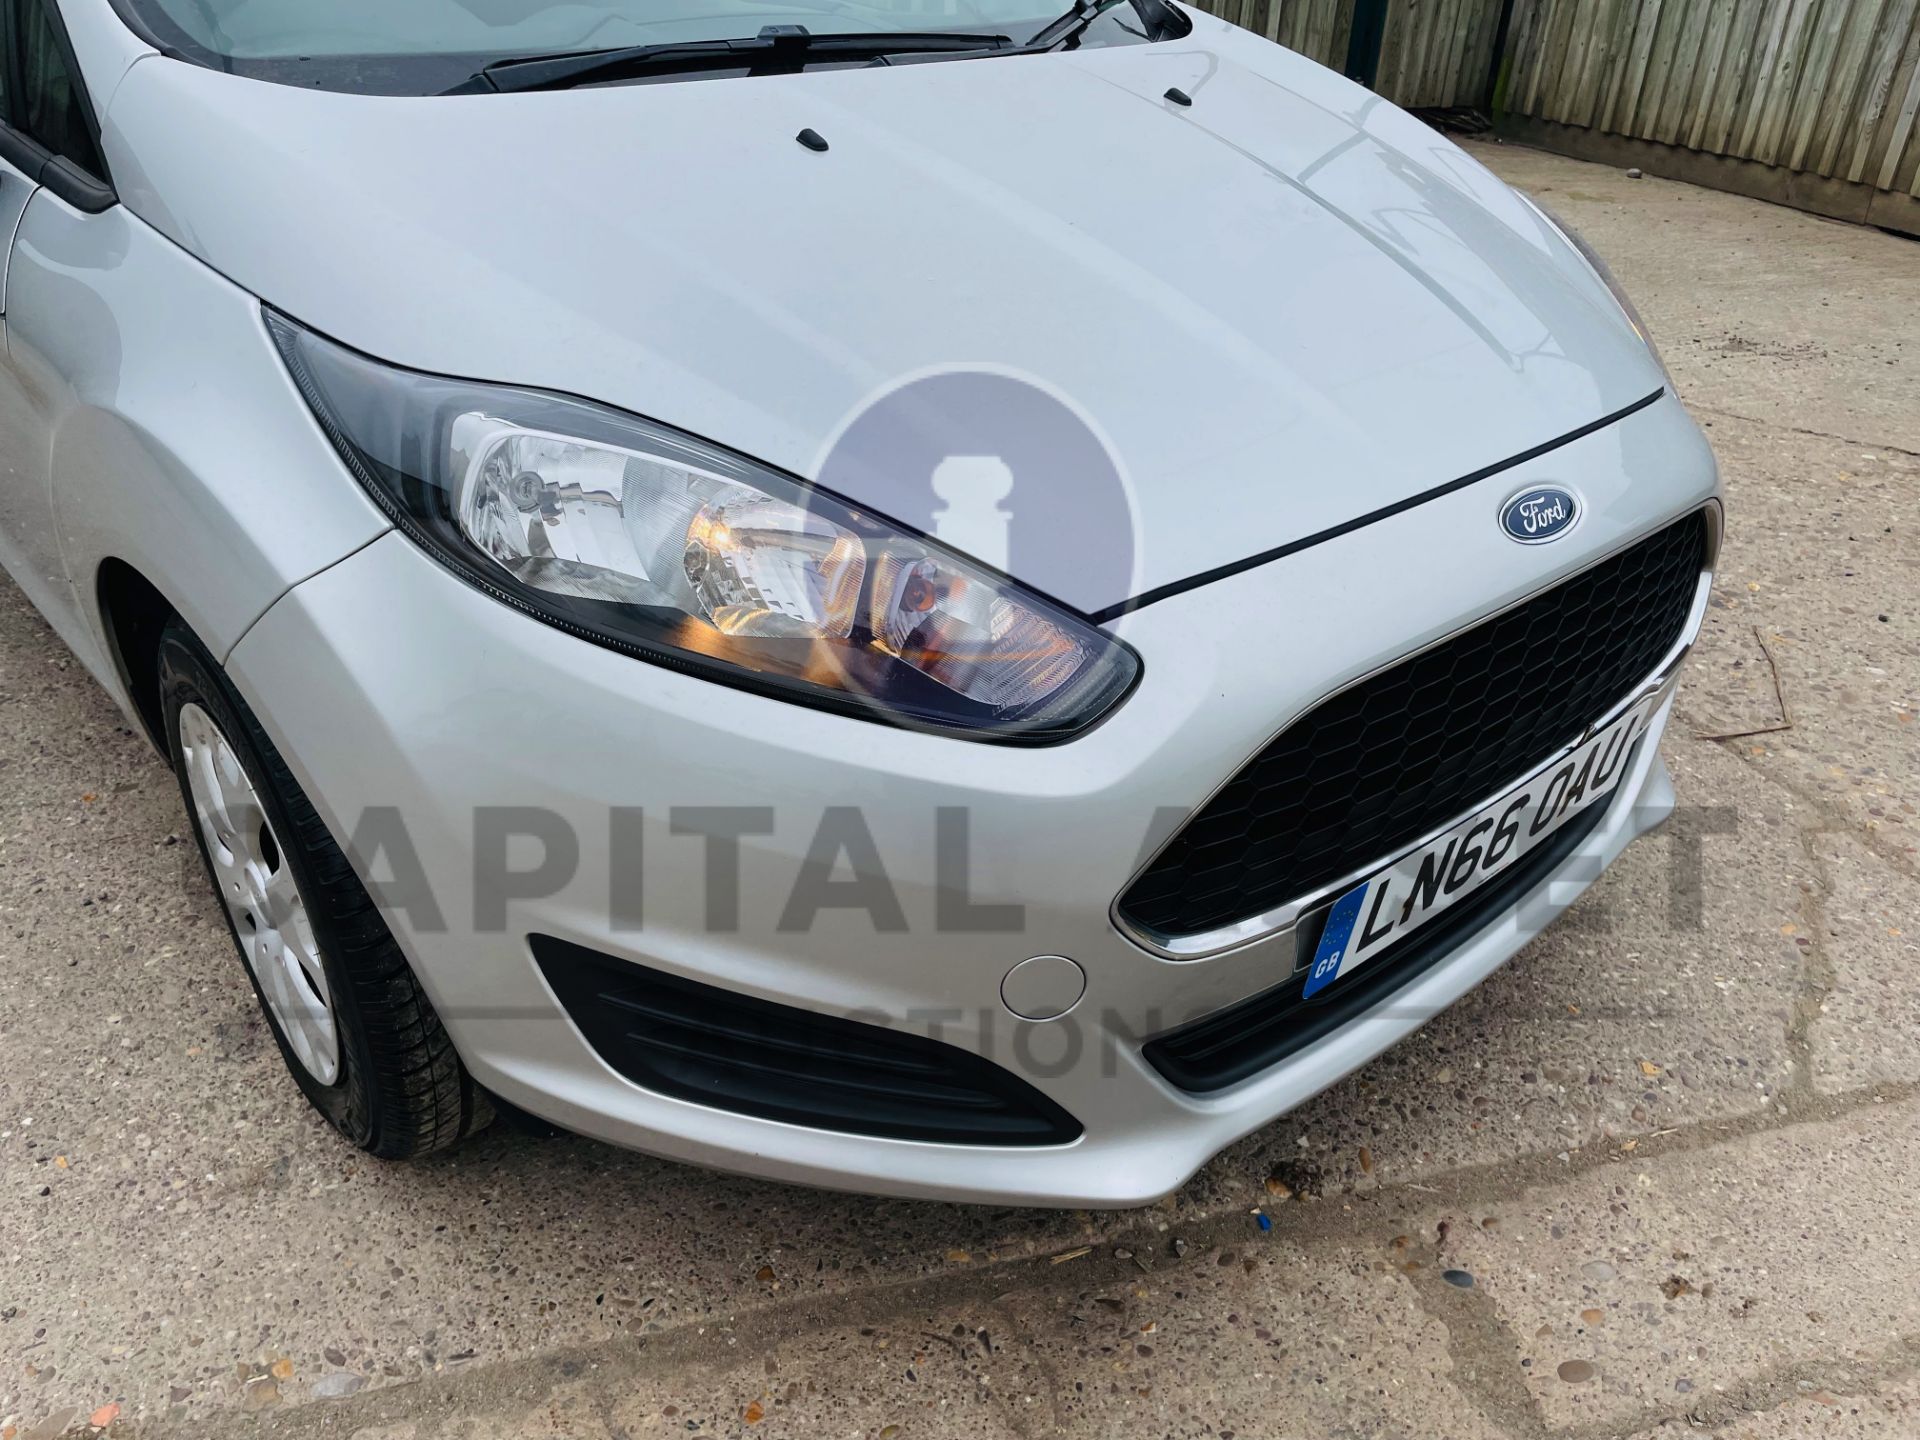 FORD FIESTA *LCV - PANEL VAN* (2017 - EURO 6) 1.5 TDCI - AUTO STOP/START (1 OWNER) *AIR CON* - Image 16 of 38